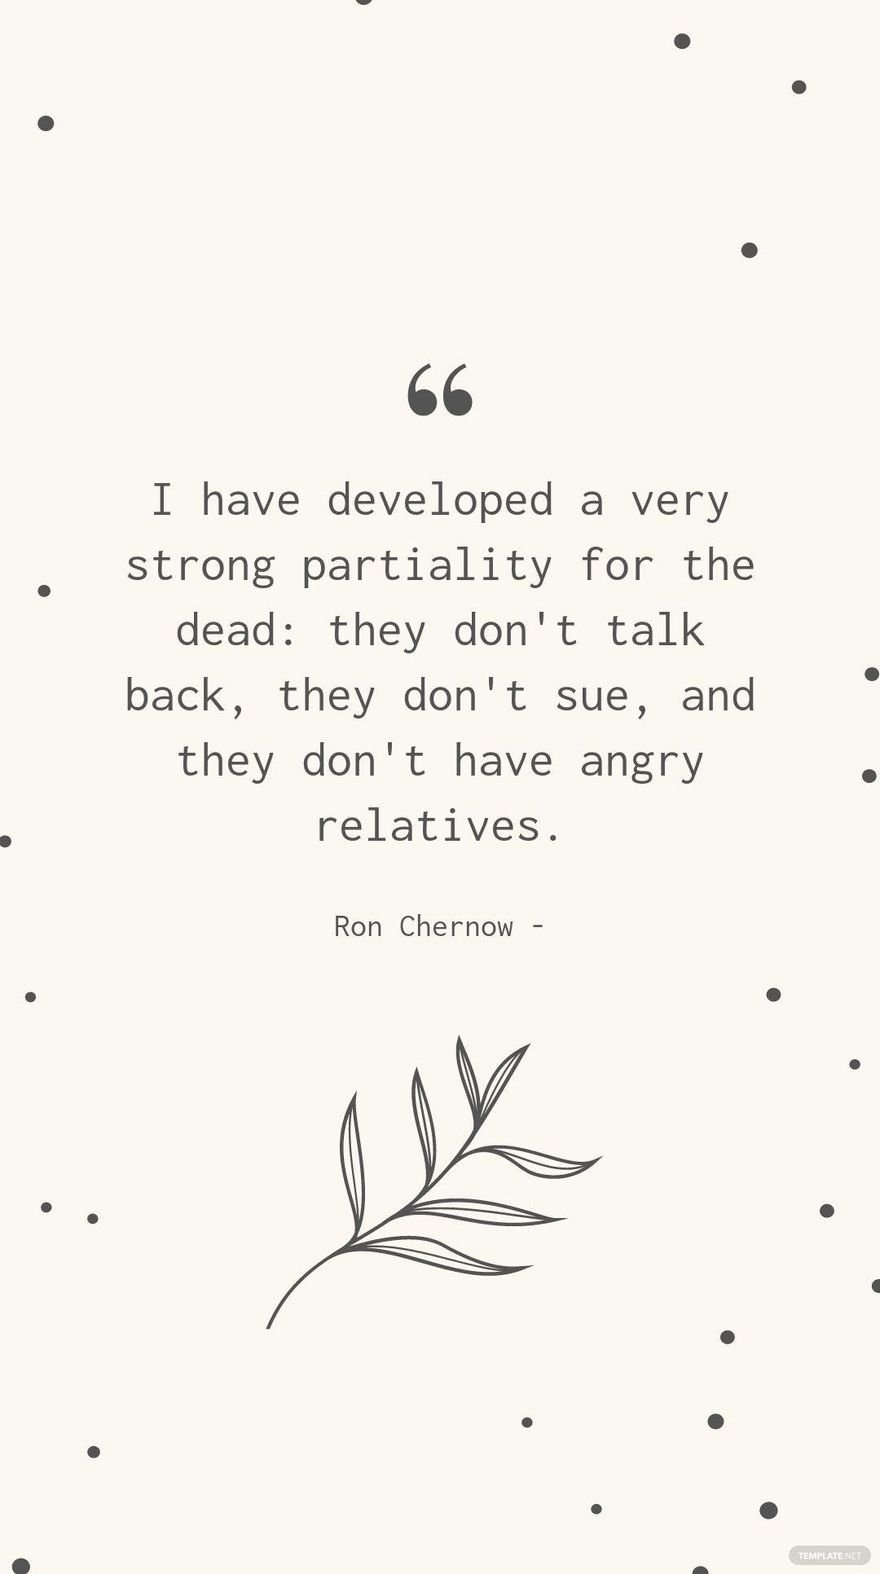 Ron Chernow - I have developed a very strong partiality for the dead: they don't talk back, they don't sue, and they don't have angry relatives.